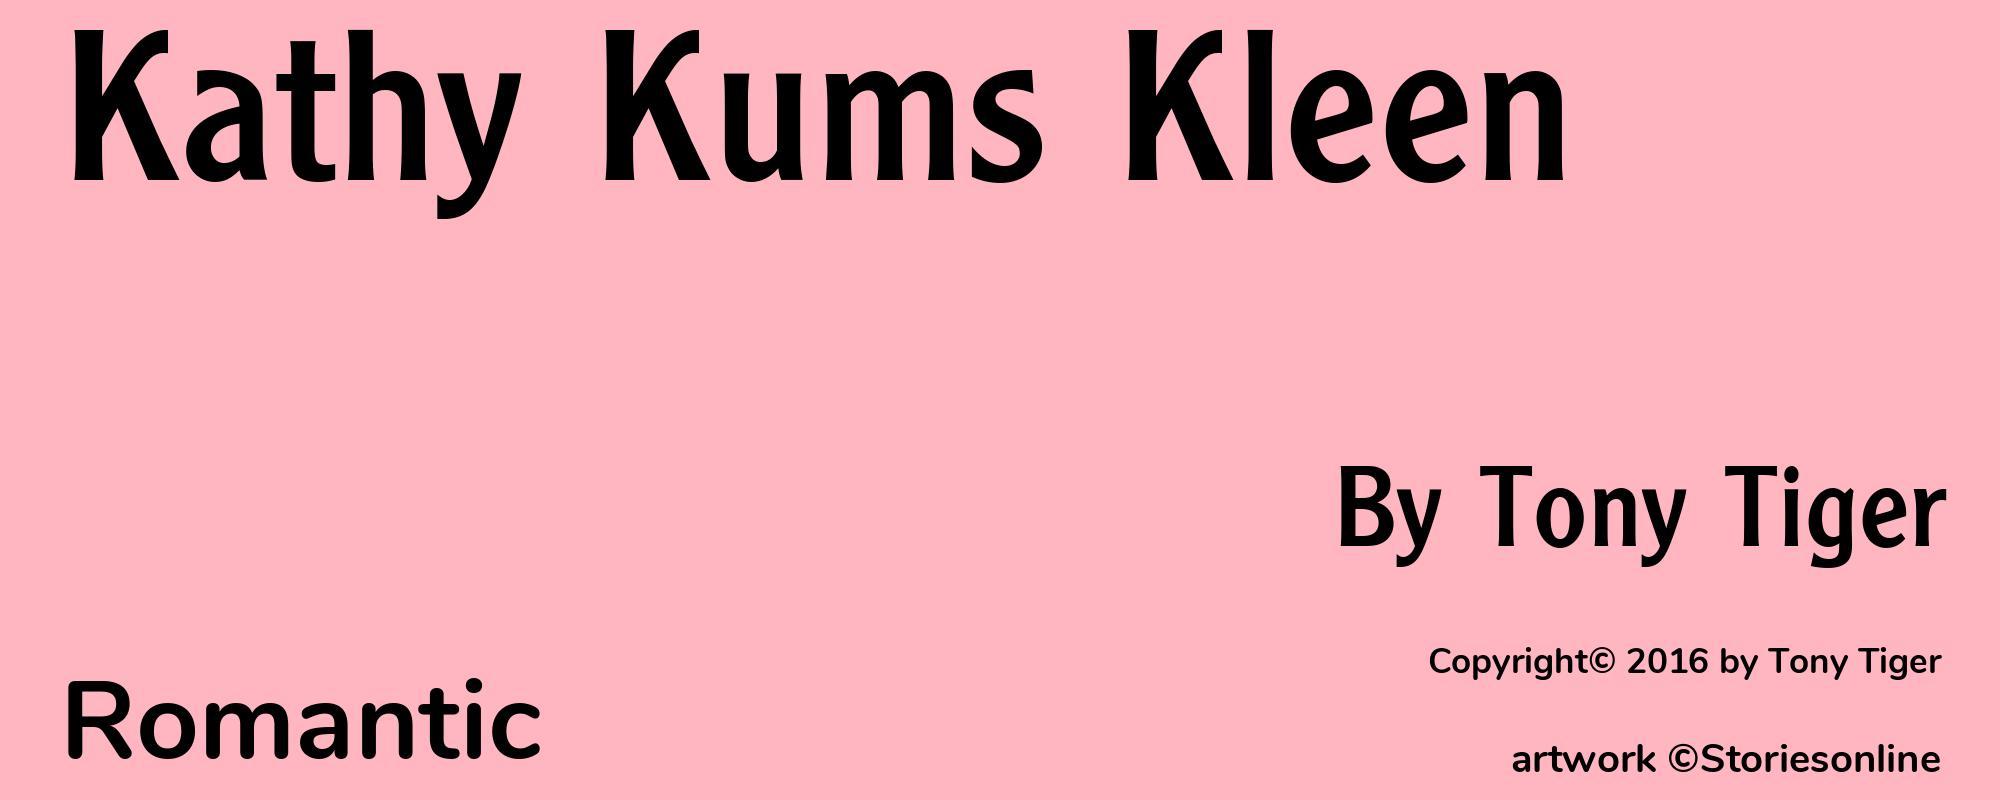 Kathy Kums Kleen - Cover